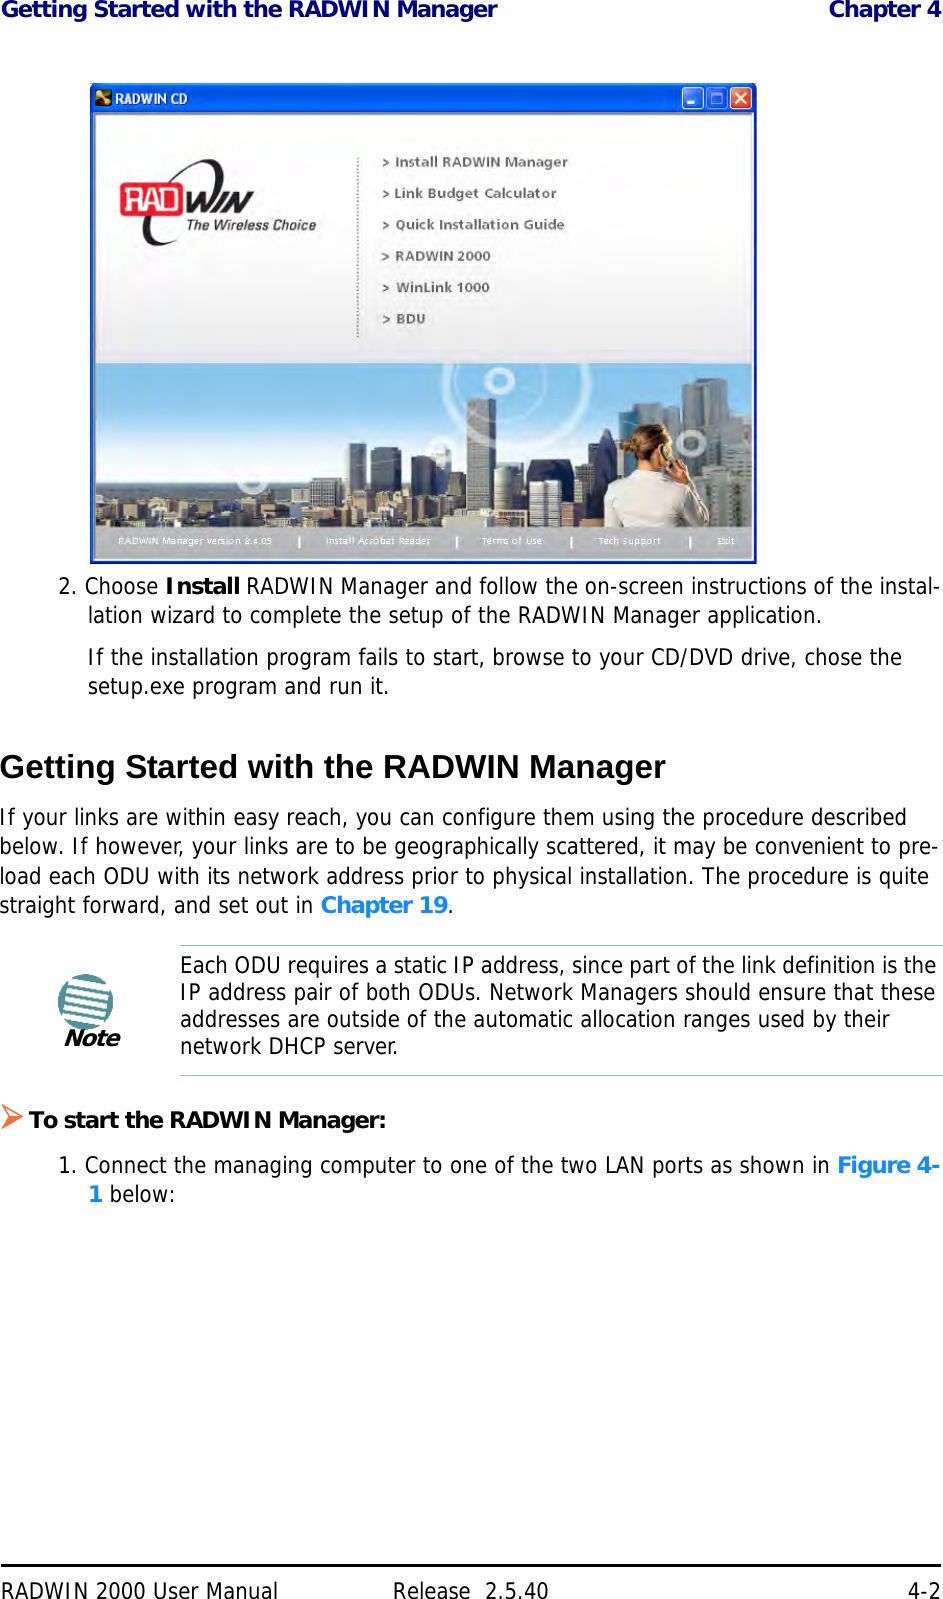 Getting Started with the RADWIN Manager Chapter 4RADWIN 2000 User Manual Release  2.5.40 4-22. Choose Install RADWIN Manager and follow the on-screen instructions of the instal-lation wizard to complete the setup of the RADWIN Manager application.If the installation program fails to start, browse to your CD/DVD drive, chose the setup.exe program and run it.Getting Started with the RADWIN Manager If your links are within easy reach, you can configure them using the procedure described below. If however, your links are to be geographically scattered, it may be convenient to pre-load each ODU with its network address prior to physical installation. The procedure is quite straight forward, and set out in Chapter 19. To start the RADWIN Manager:1. Connect the managing computer to one of the two LAN ports as shown in Figure 4-1 below:NoteEach ODU requires a static IP address, since part of the link definition is the IP address pair of both ODUs. Network Managers should ensure that these addresses are outside of the automatic allocation ranges used by their network DHCP server.?